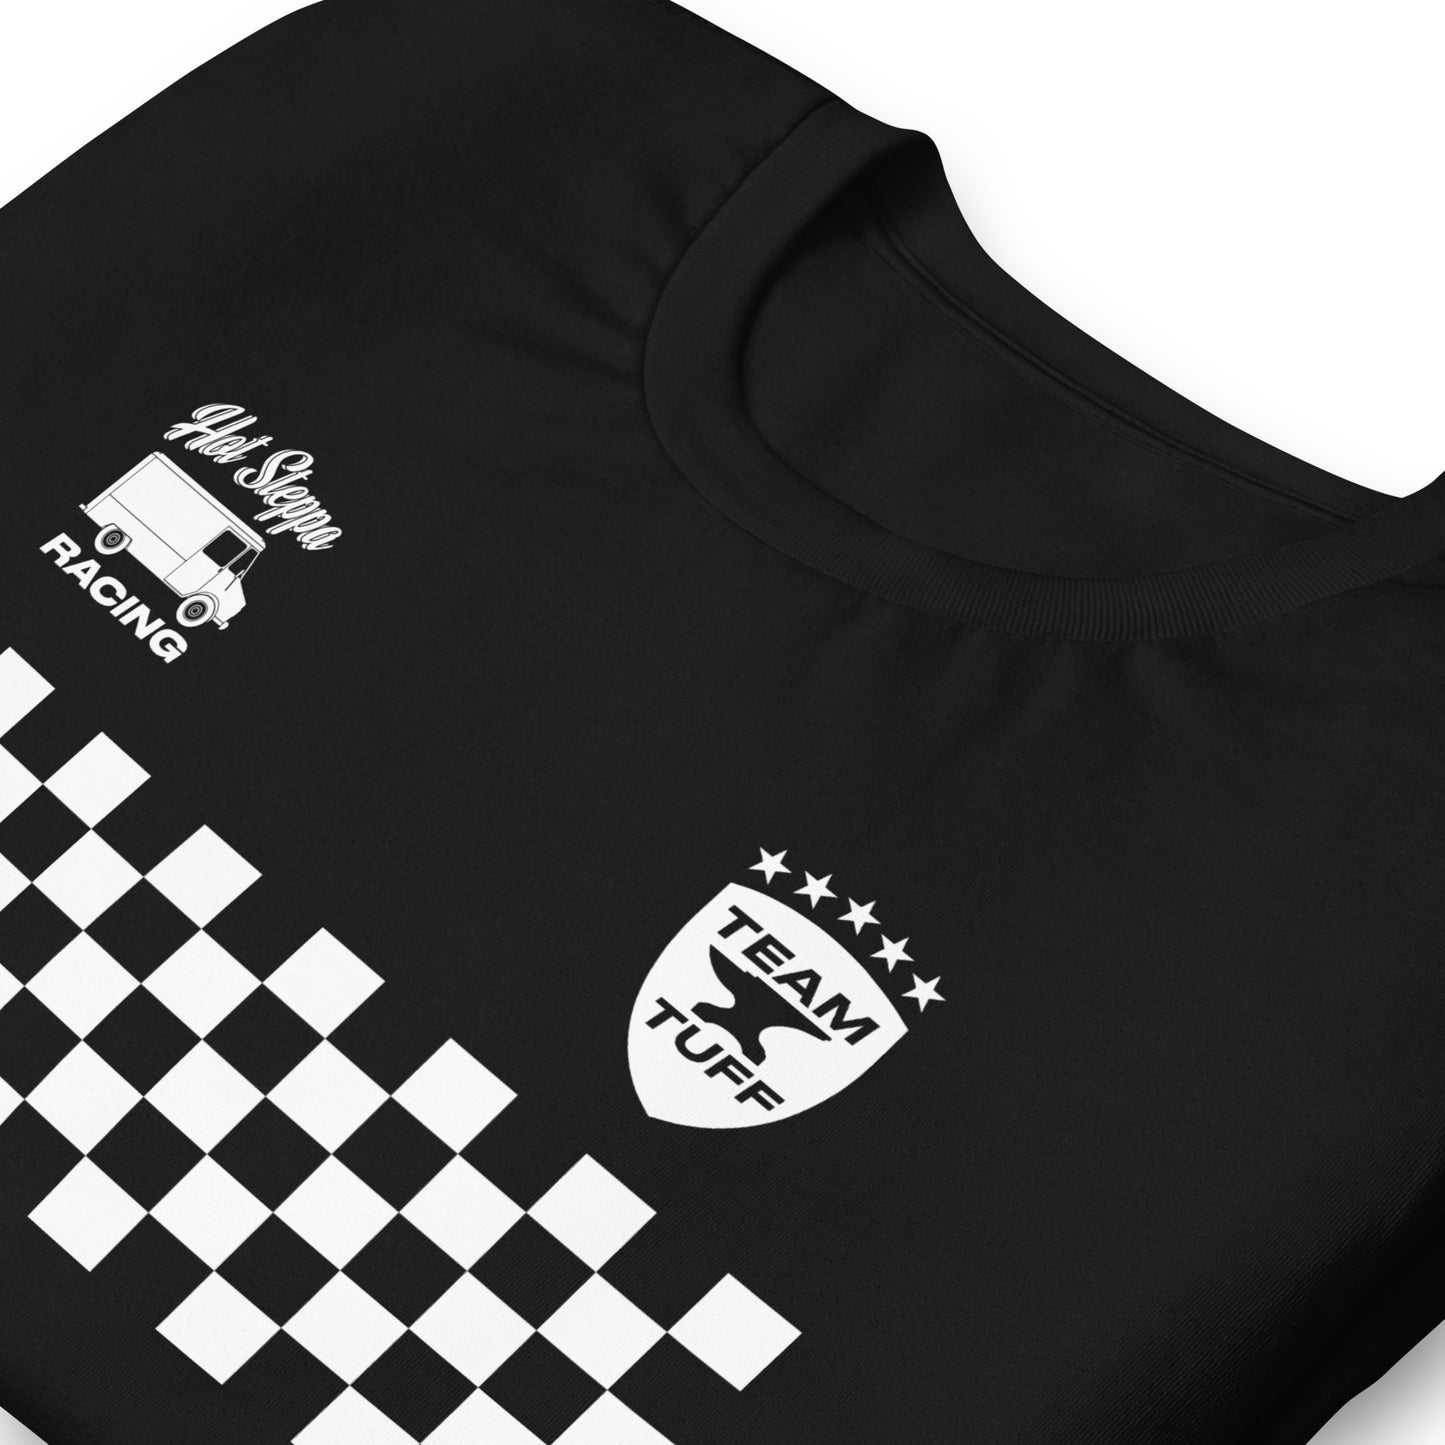 Roll Out 77 Tee - Black / White